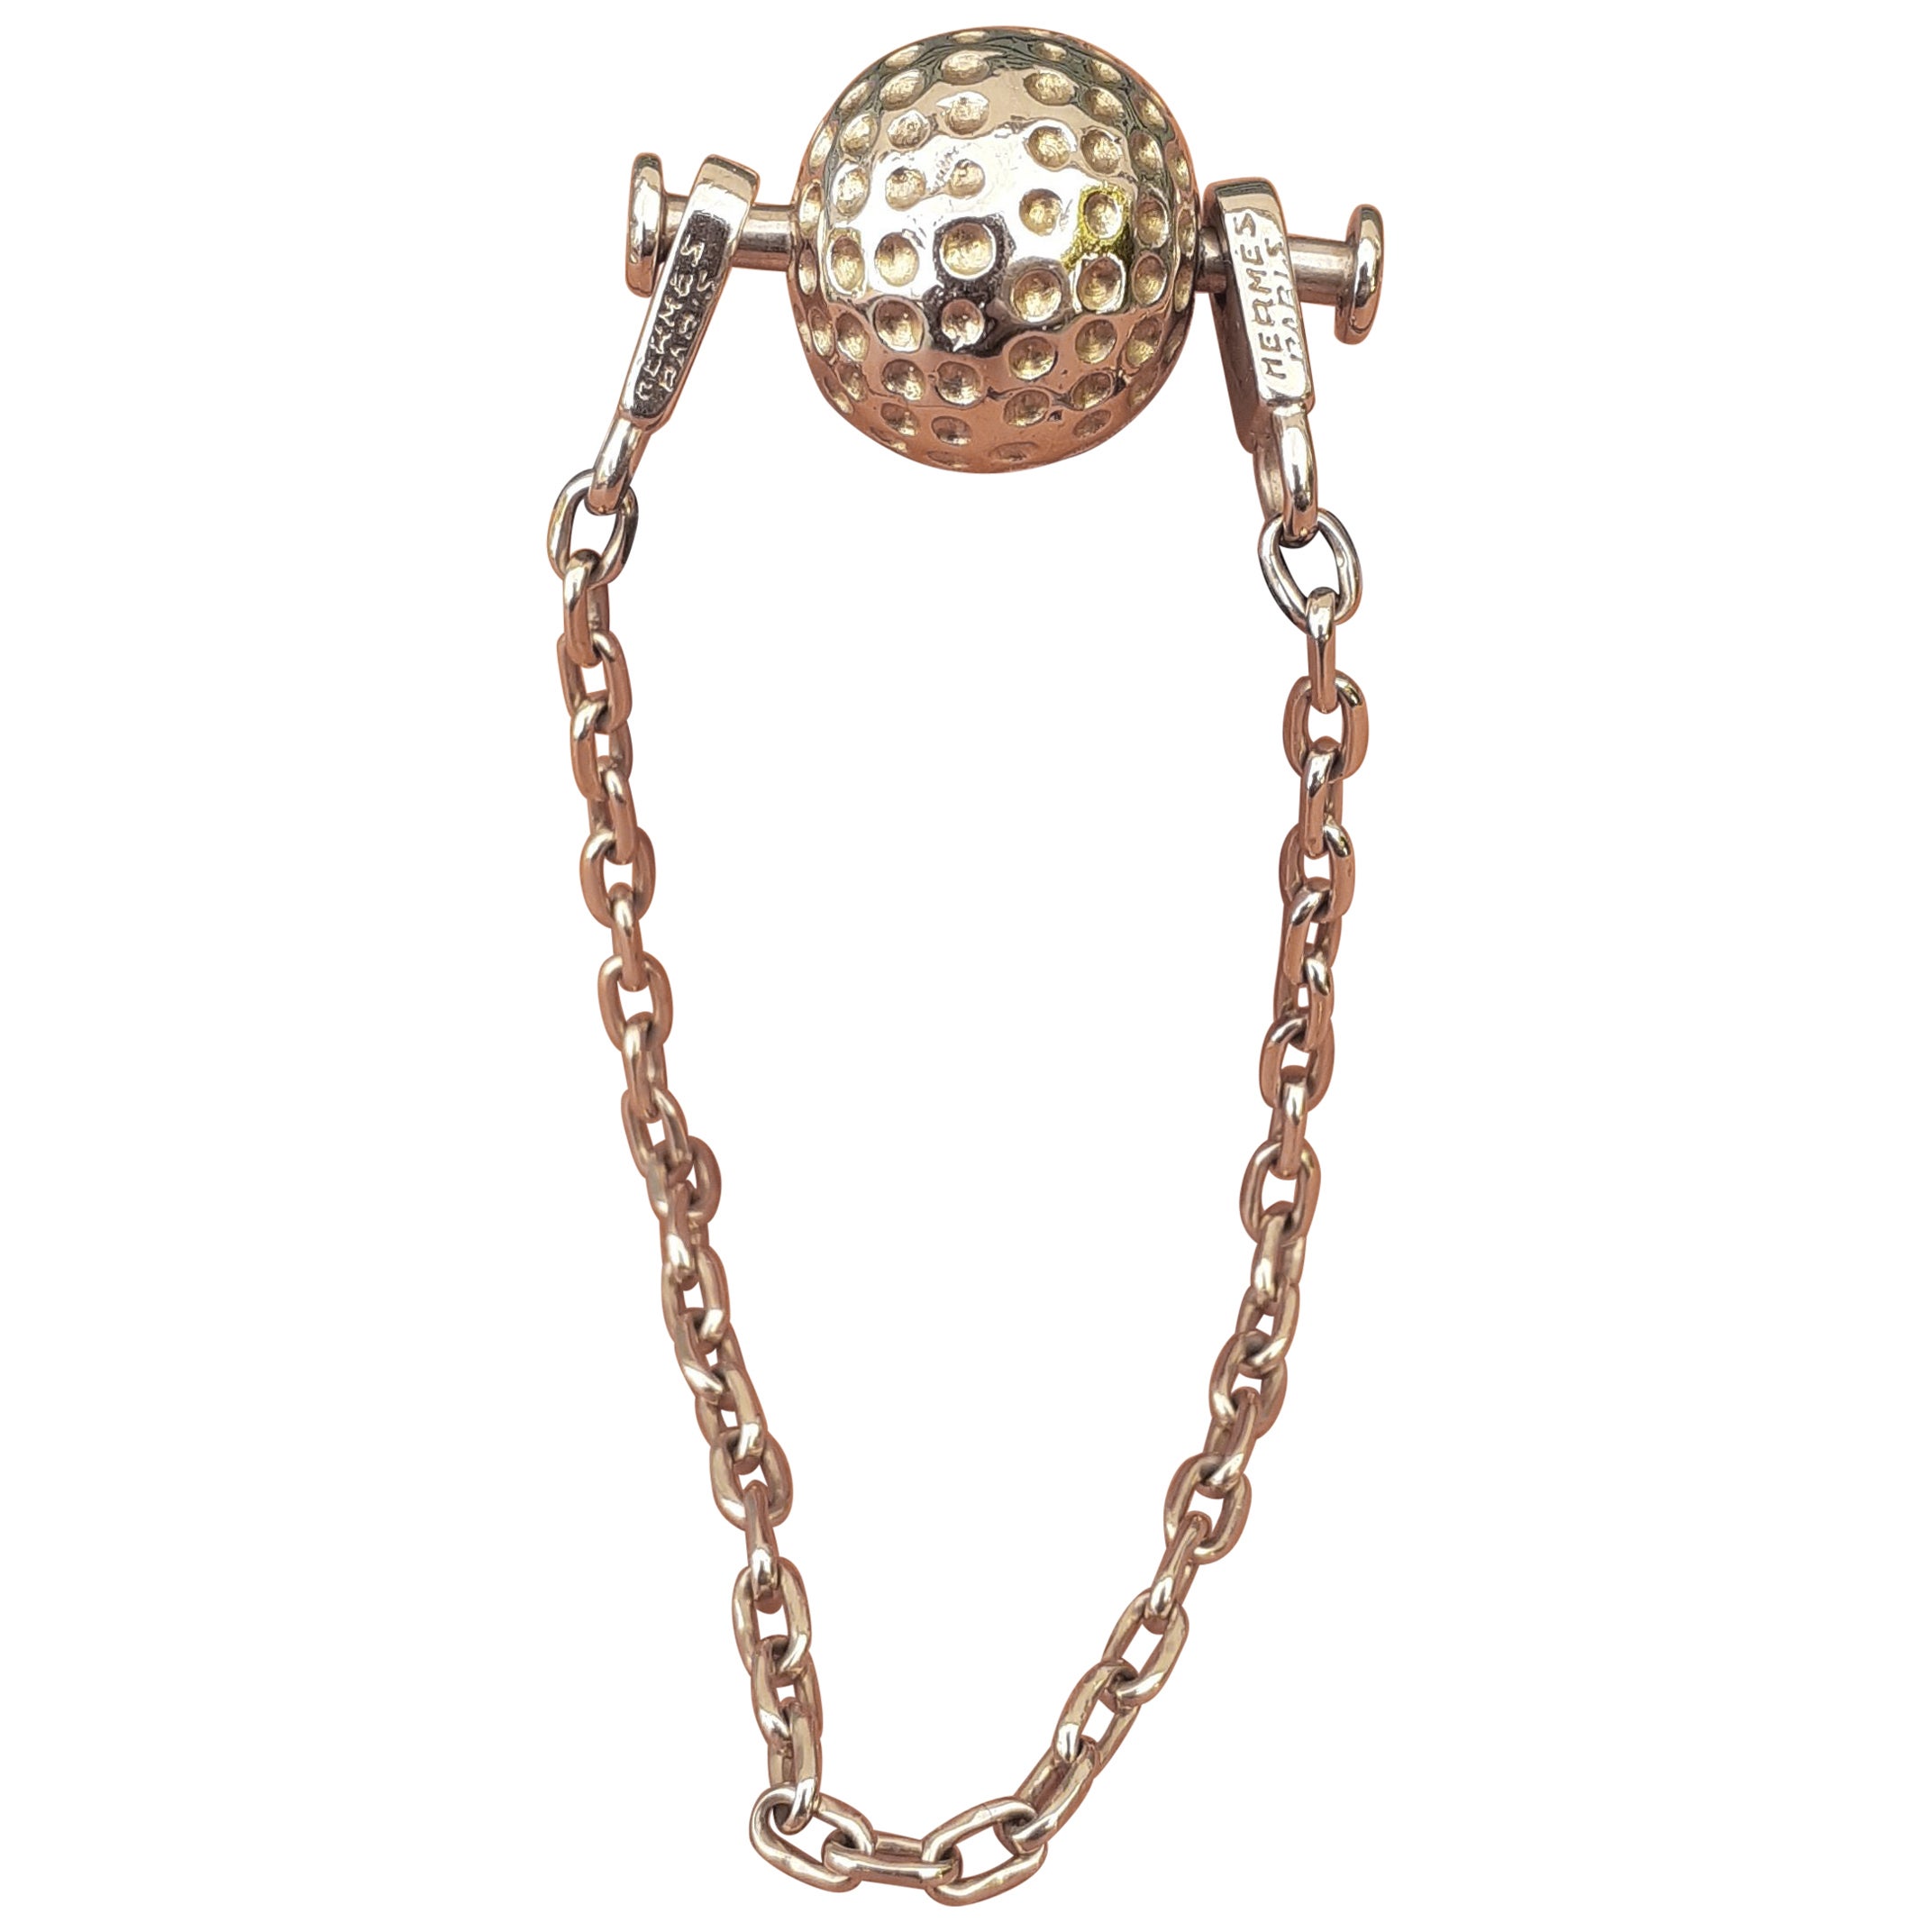 Exceptional Hermès Key Holder Keychain Golf Ball Shape in Yellow Gold RARE